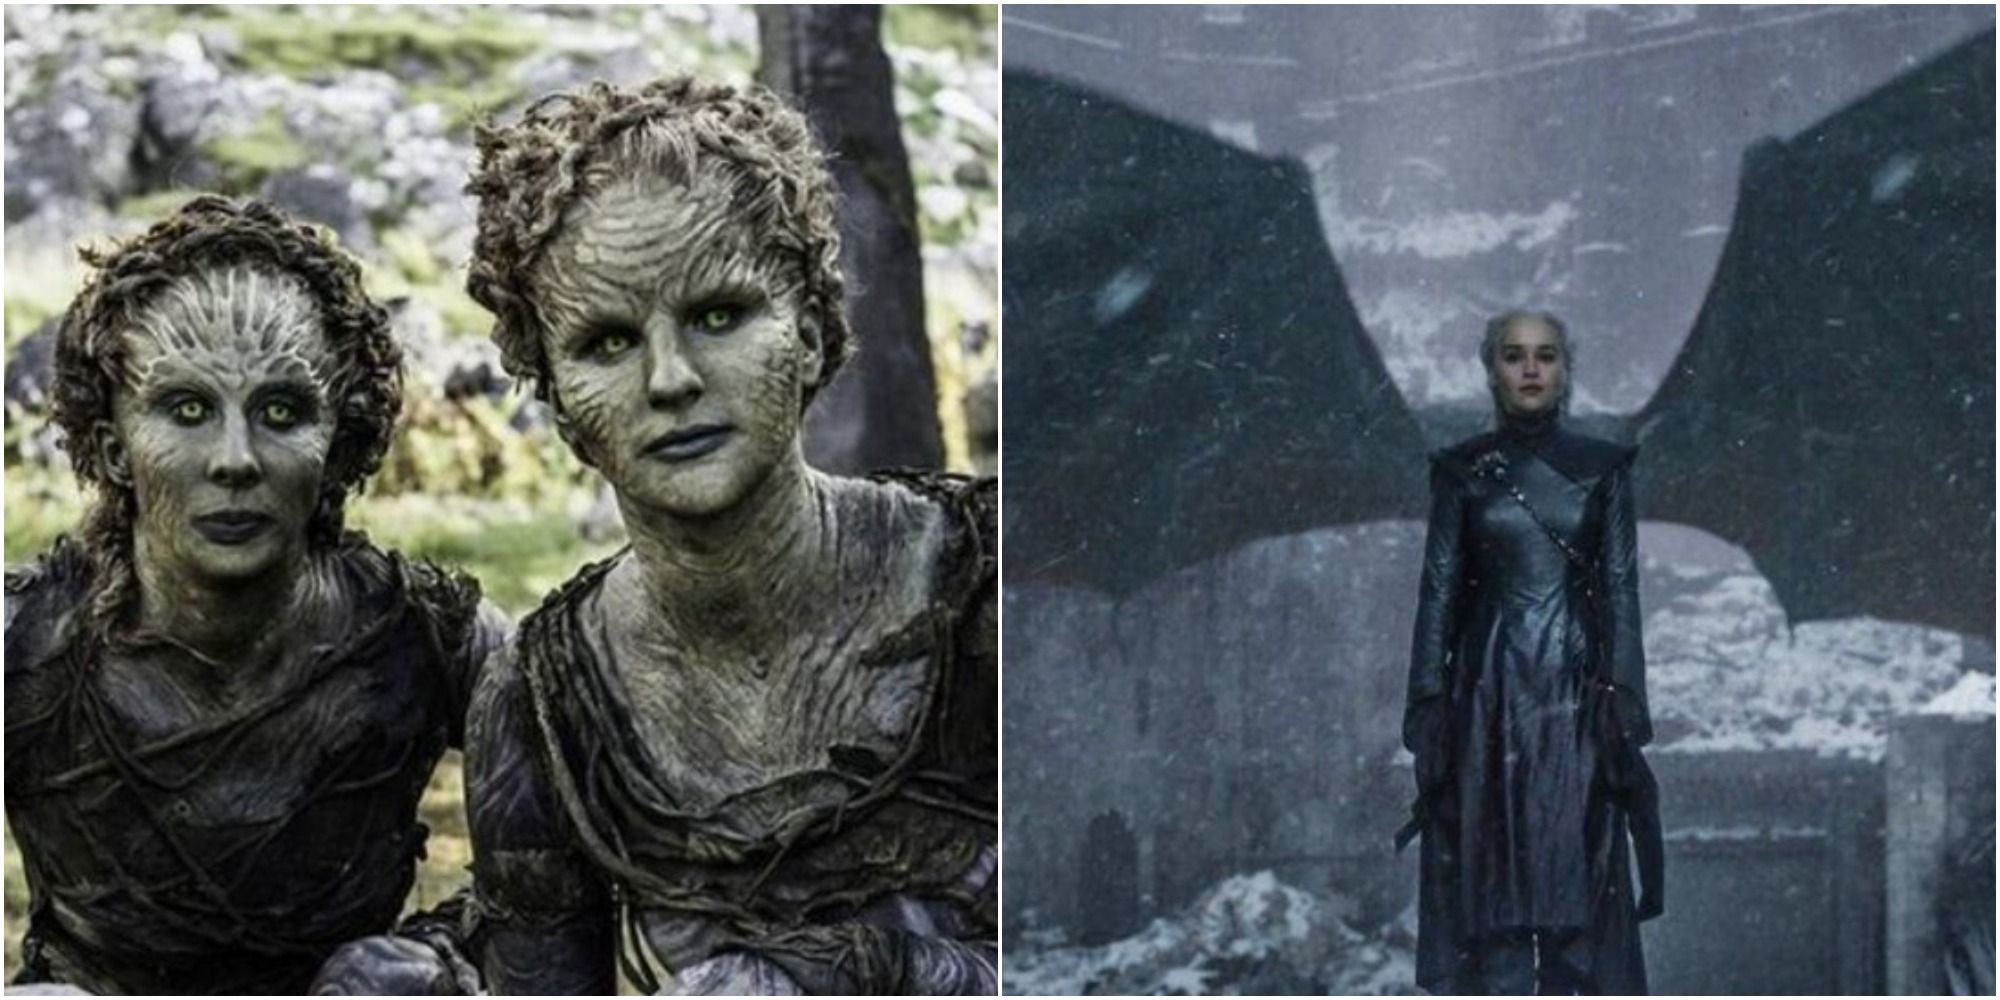 A split image of the Children of the Forest and Daenerys from Game of Thrones.